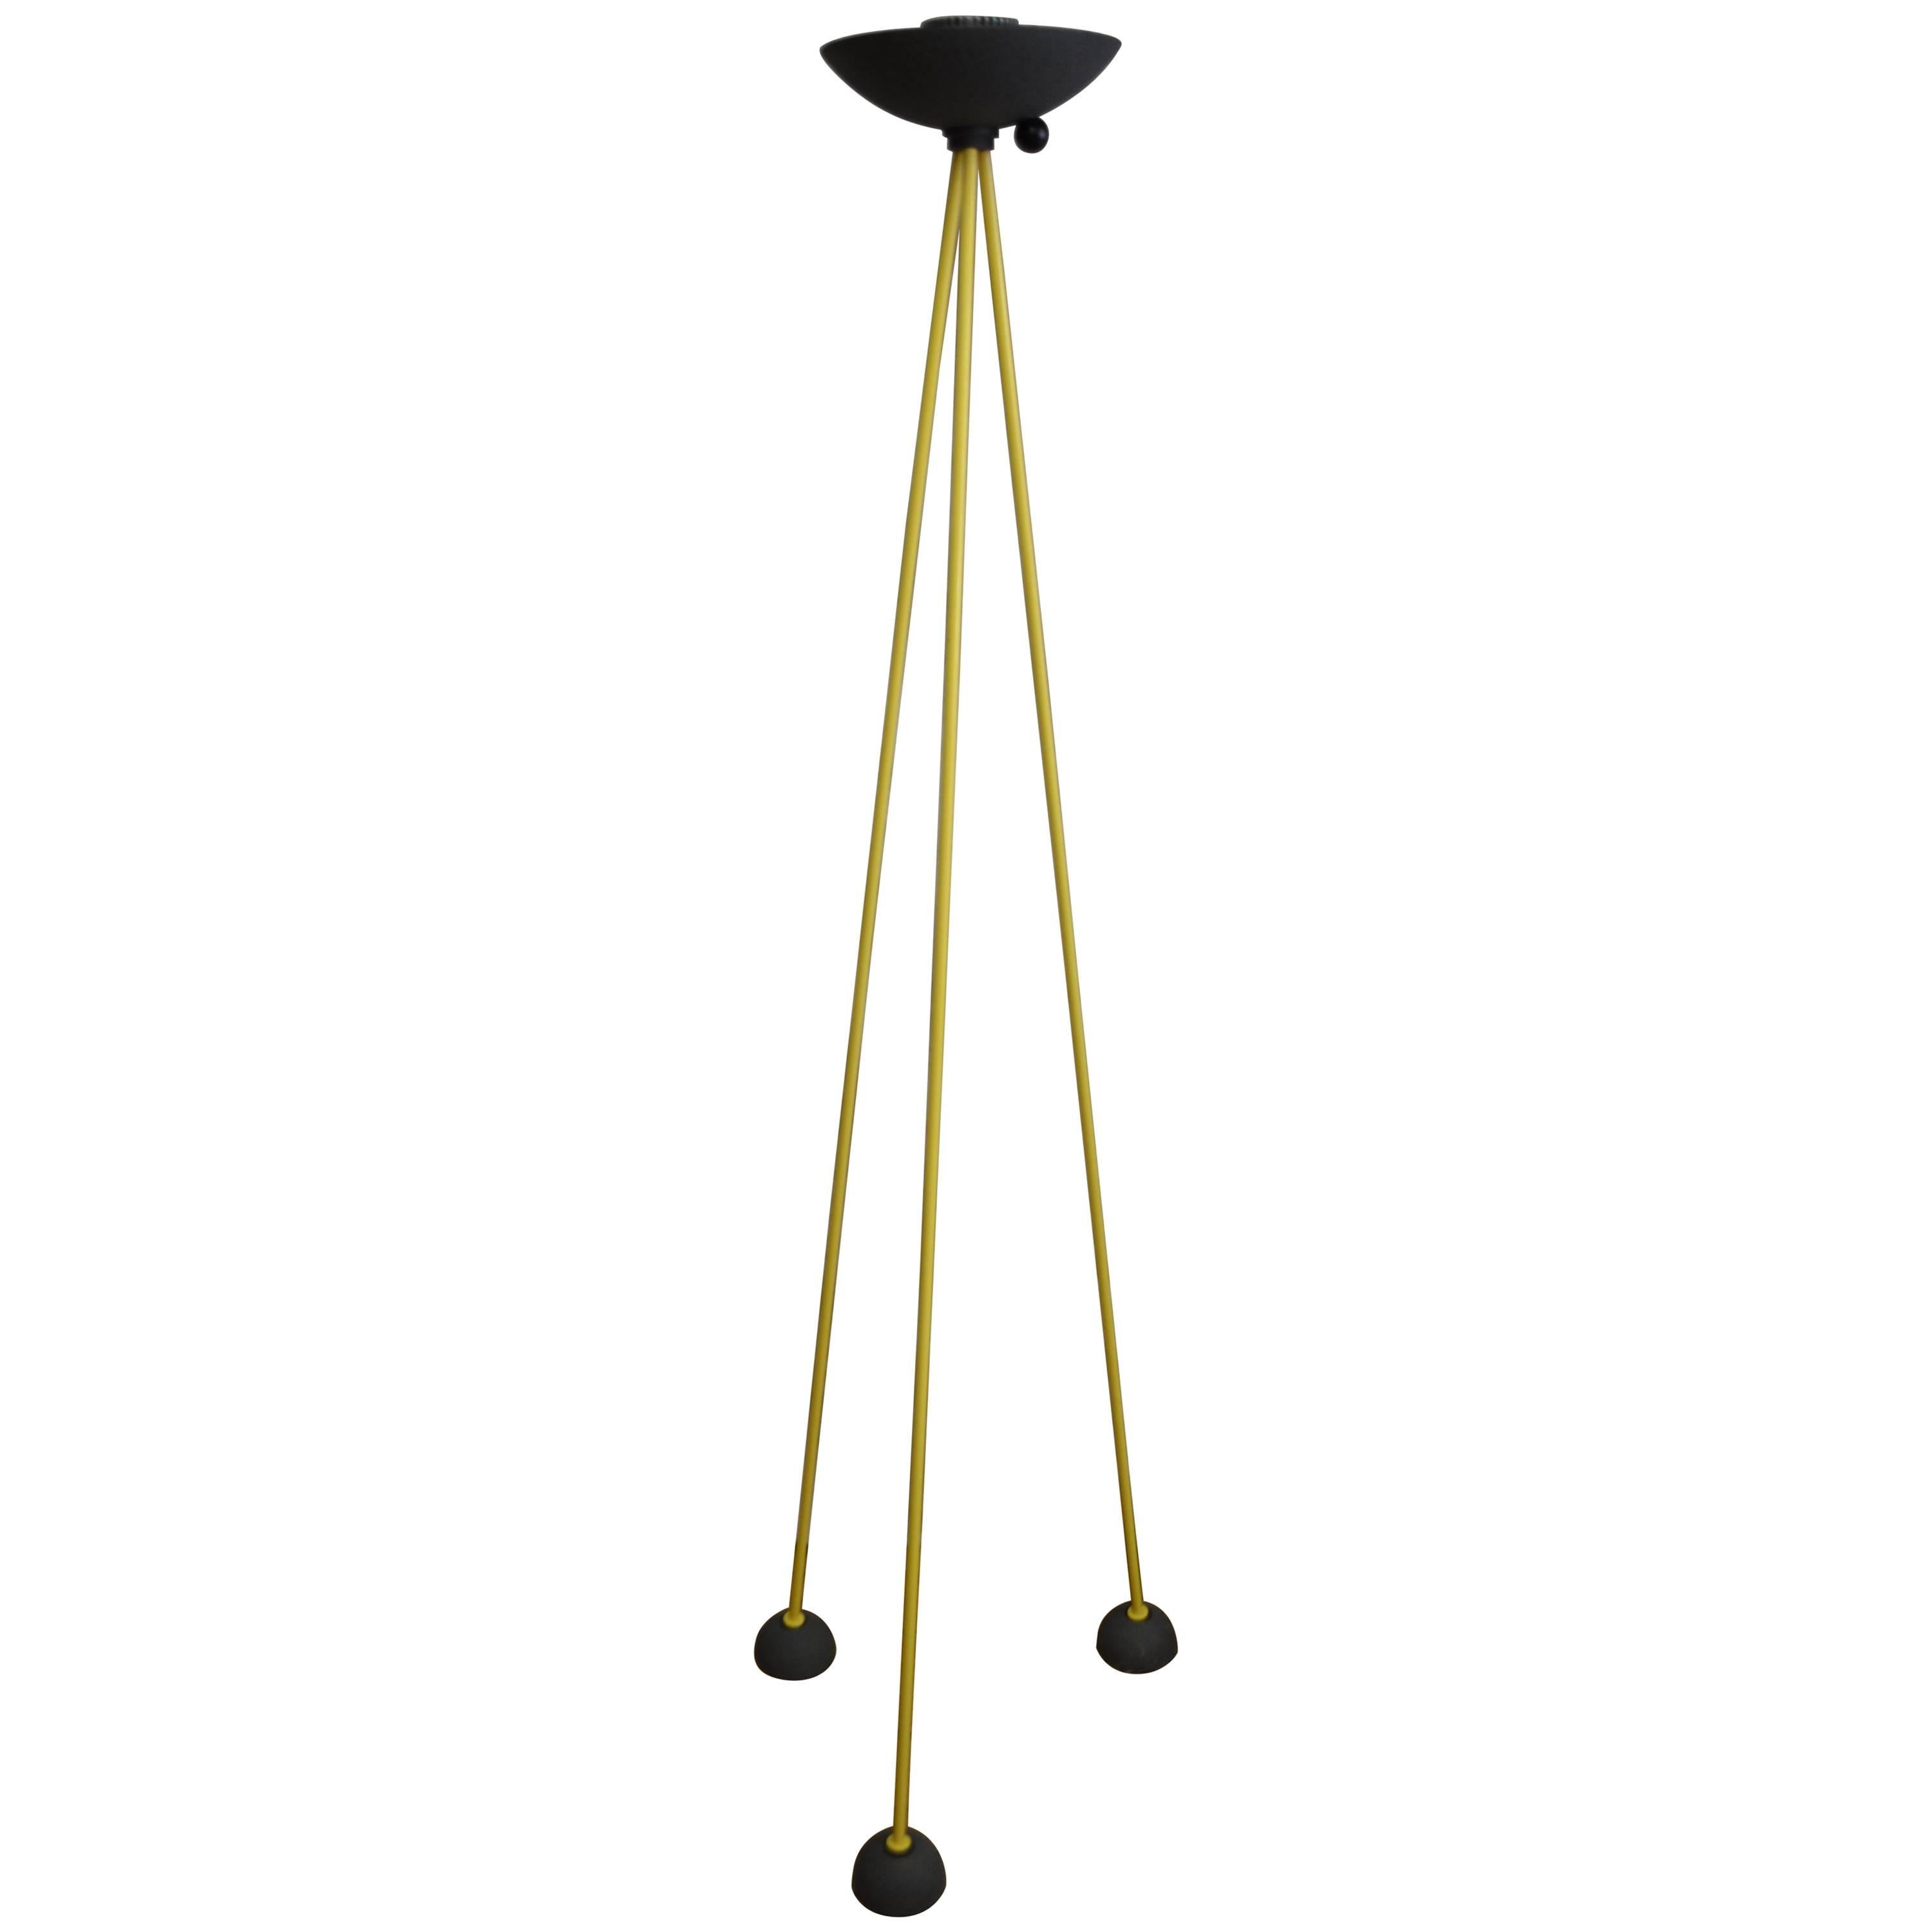 Tripod Floor Lamp, "Memphis" Style by Koch & Lowy, Called Footsteps, circa 1990s